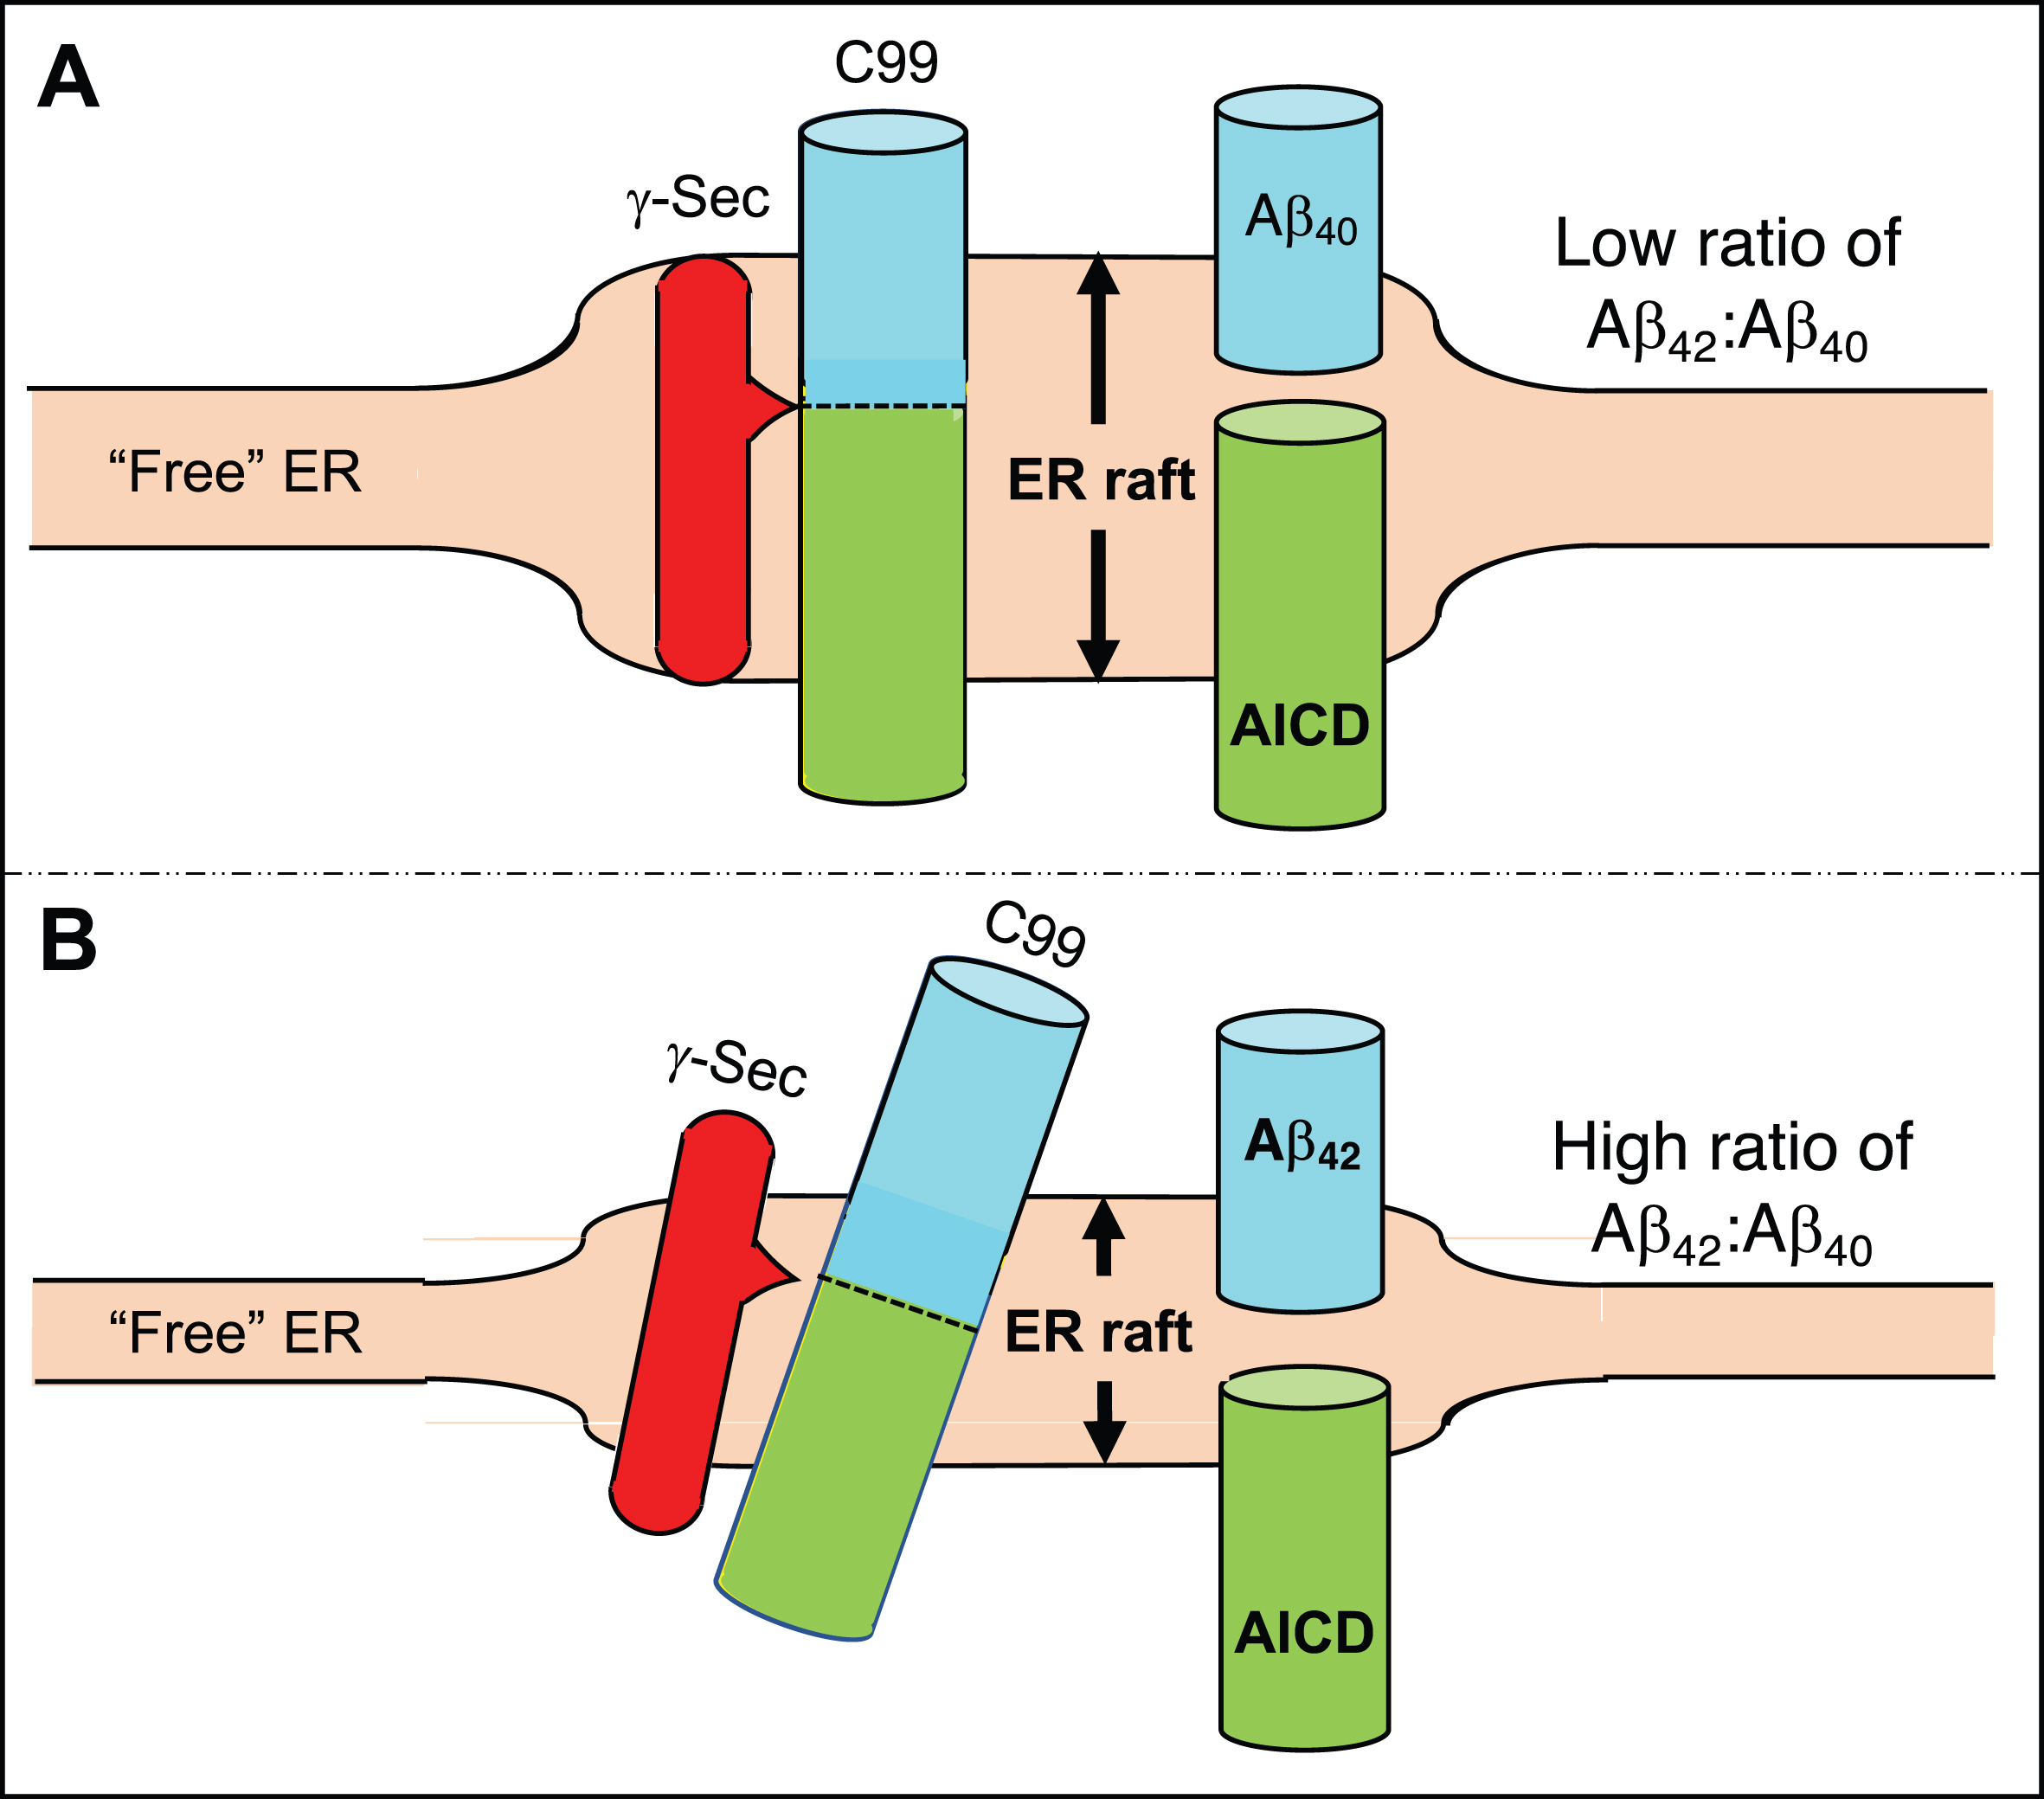 Generation of Aβ40 versus Aβ42. A) In the normal situation the γ-secretase complex aligns with C99 in the ER raft such that its initial cleavage favors a product line that generates Aβ40, and the Aβ42:Aβ40 ratio is relatively low. B) In AD, the ER raft is thinner than normal (shorter double-headed arrow) but is still thicker than the “free” ER. Hydrophobic matching of C99’s α-helical region within the thinner membrane causes it (and perhaps the γ-secretase complex as well) to tilt, resulting in the initial cleavage of C99 displaced by ∼2 amino acids, generating a higher Aβ42:Aβ40 ratio. See text for details.